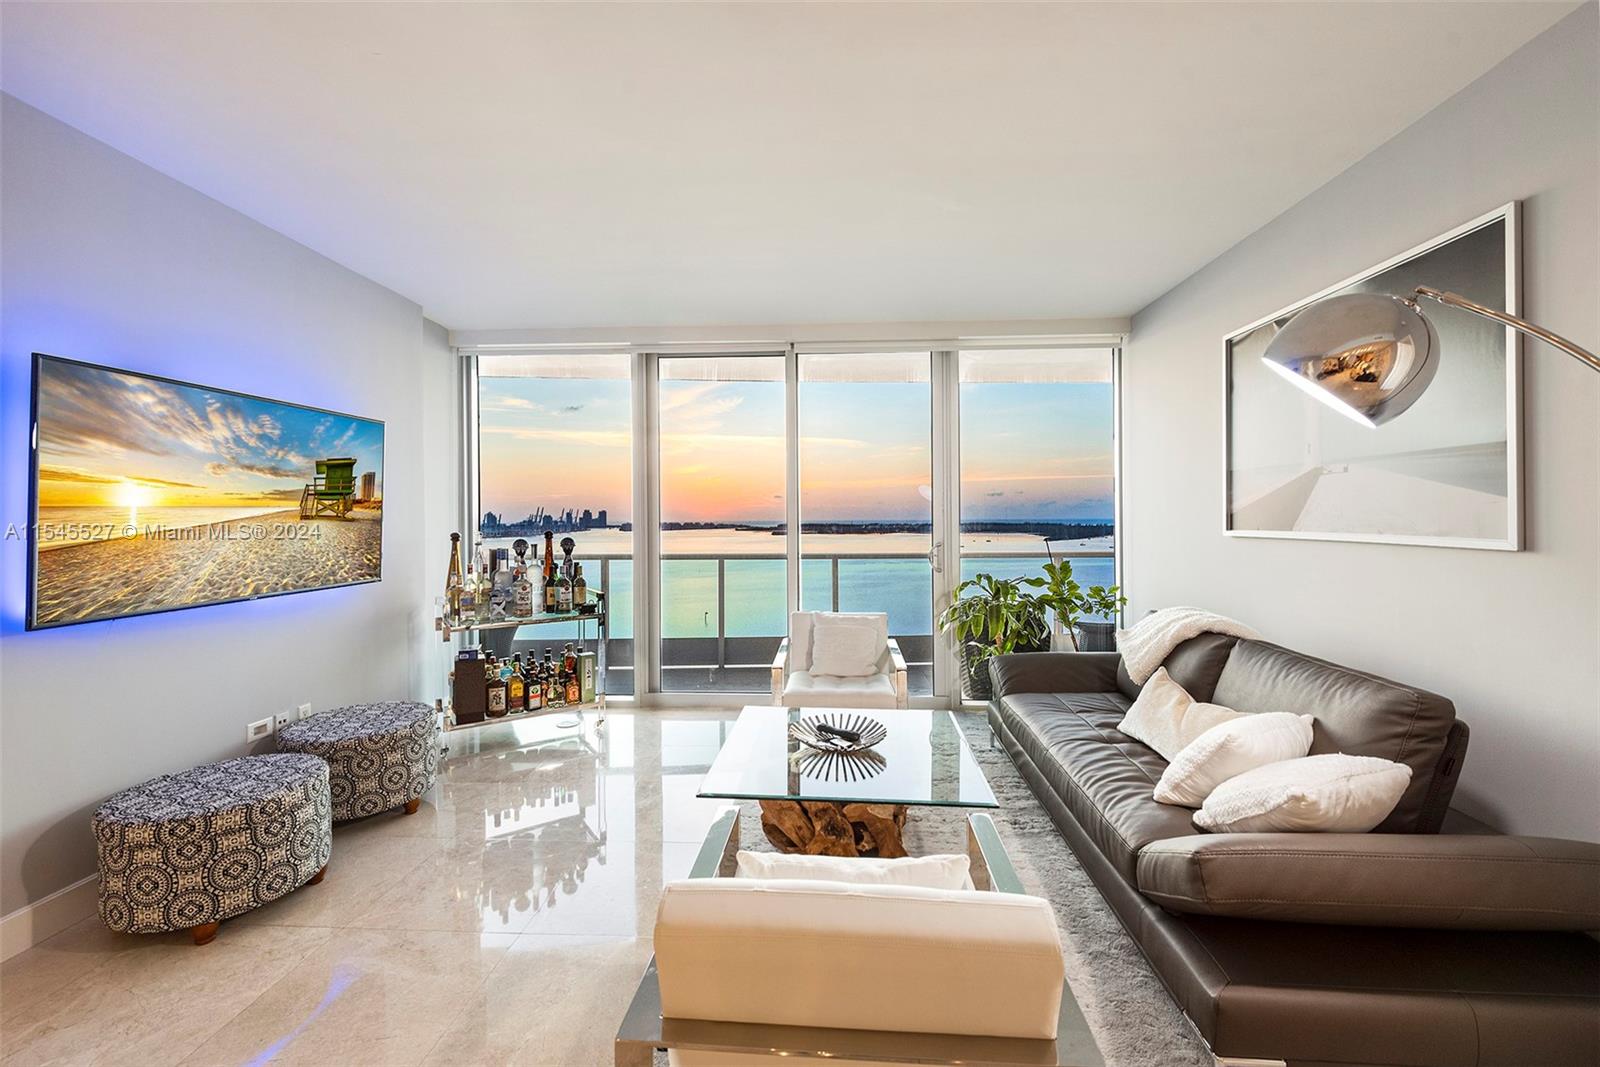 Discover the epitome of luxury living at Jade, where every room of this condo captures the breathtaking morning sunrise over Biscayne Bay, Fisher Island, and the Port of Miami. A private elevator leads to 1760sf of the finest marble flooring throughout the entire home, with a versatile den perfect for a 3rd bedroom or workspace. Enjoy one of the best managed buildings in Brickell with top-tier amenities including a premier gym, two waterfront pools with cabana service, and the exquisite Asian Mediterranean cuisine of Consentido, located on the lobby level. Host magnificent gatherings in the Penthouse Club Room, with unlimited complimentary valet parking for your guests. Jade is the pinnacle of Brickell's sophistication, offering unparalleled elegance and convenience in the heart of Miami.